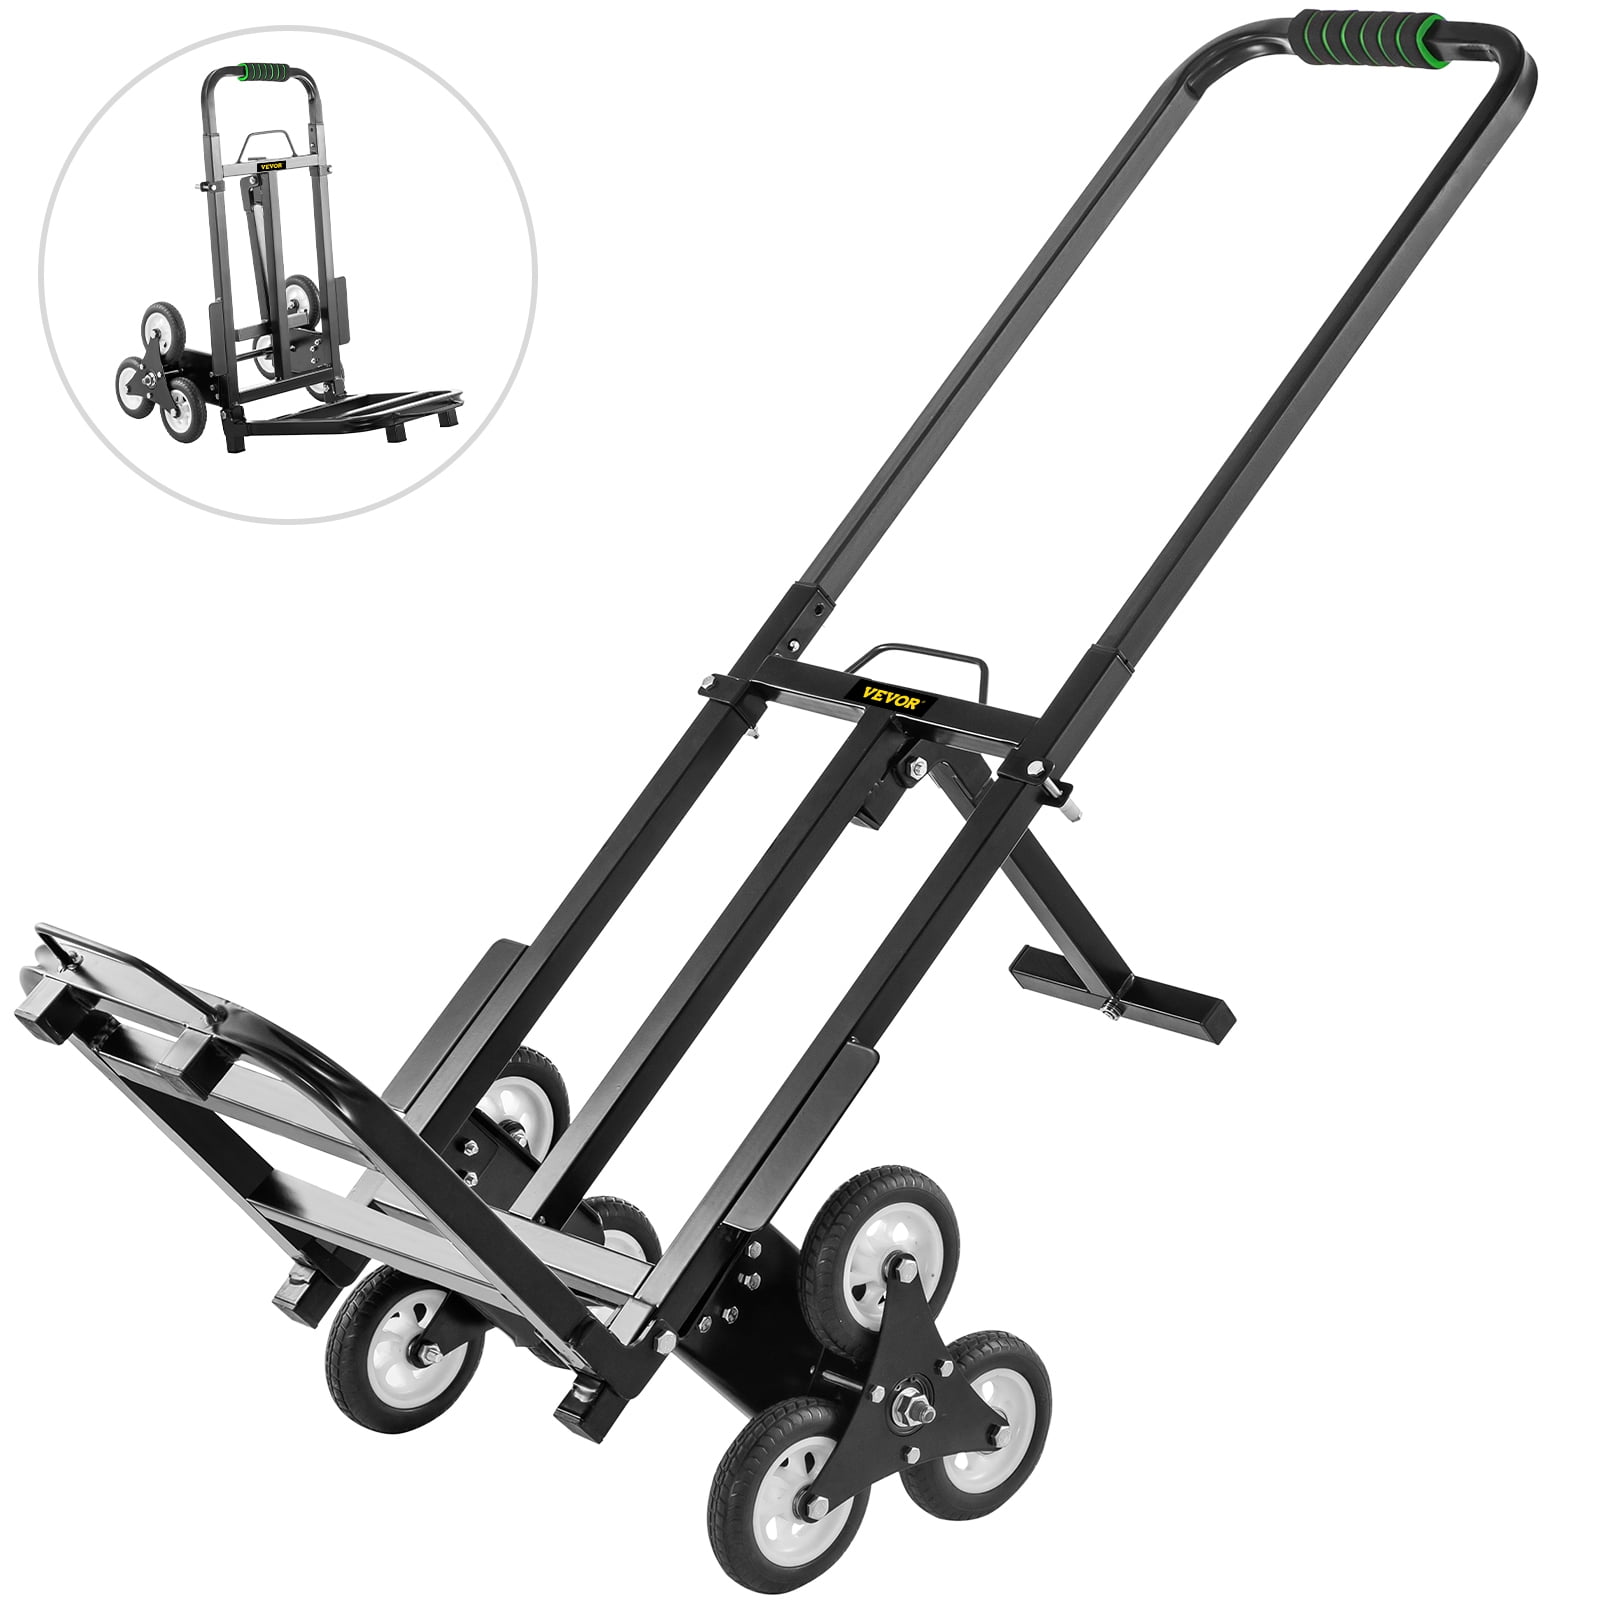 MaxWorks 50562 Adjustable Multi-Functional Mobile Dolly Roller Base 500 lbs Load Capacity for Appliances and Furniture Gray 